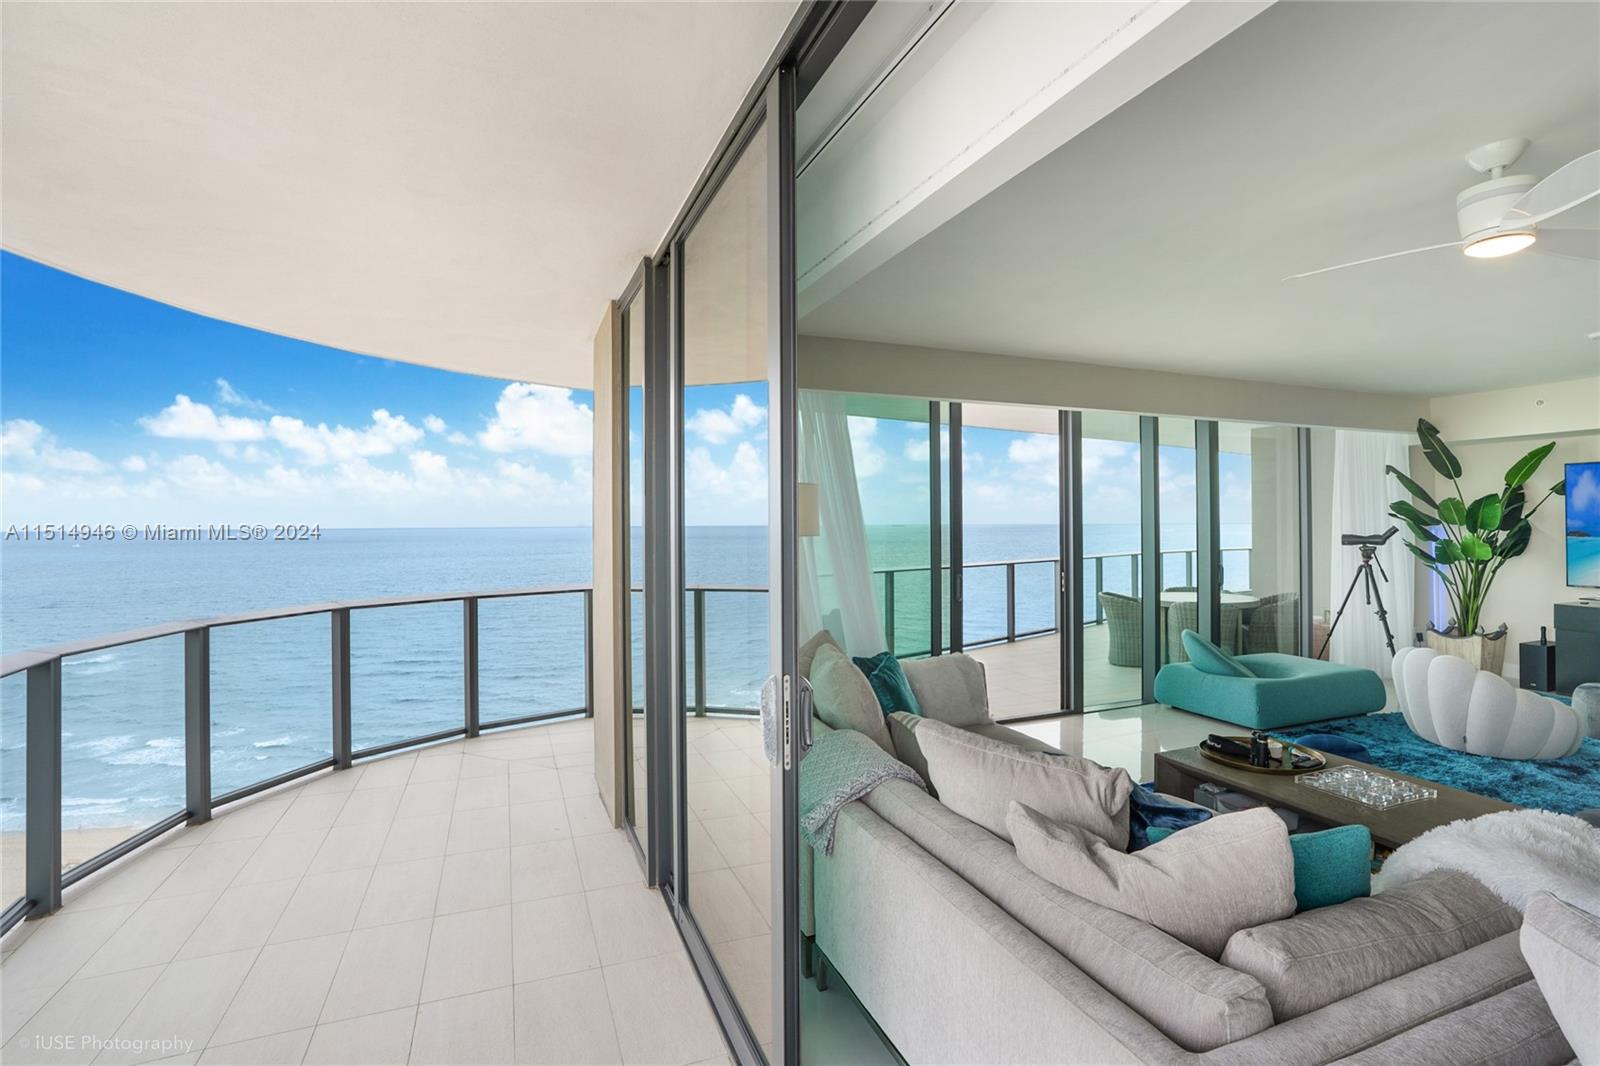 Discover this exclusive, one of a kind, ocean-front gem. This residence is an assemblage of three lines. This is the largest unit in the building & around (6,225 sq ft) with exceptional and unparalleled 200+ degree views of the intracoastal/ocean/city. This very unique layout offers a balance between privacy & open areas, ensuring comfort & adaptability for your family/guests. This rare find ftrs 2 gourmet kitchens, 2 fully-equipped laundry rooms, 7 bedrooms, 1 den, 7 full & 2 half baths, 2 private elevator foyers, 2 assigned parkings (power-charge upgraded), 3 storages, 2 balconies(approx 1500 sq ft of outdoor surface)& more. Furniture & decor curated by a designer. Enjoy the resort-style amenities: private beach access, pet area, fitness & more. Selling as an assemblage with unit 1703.